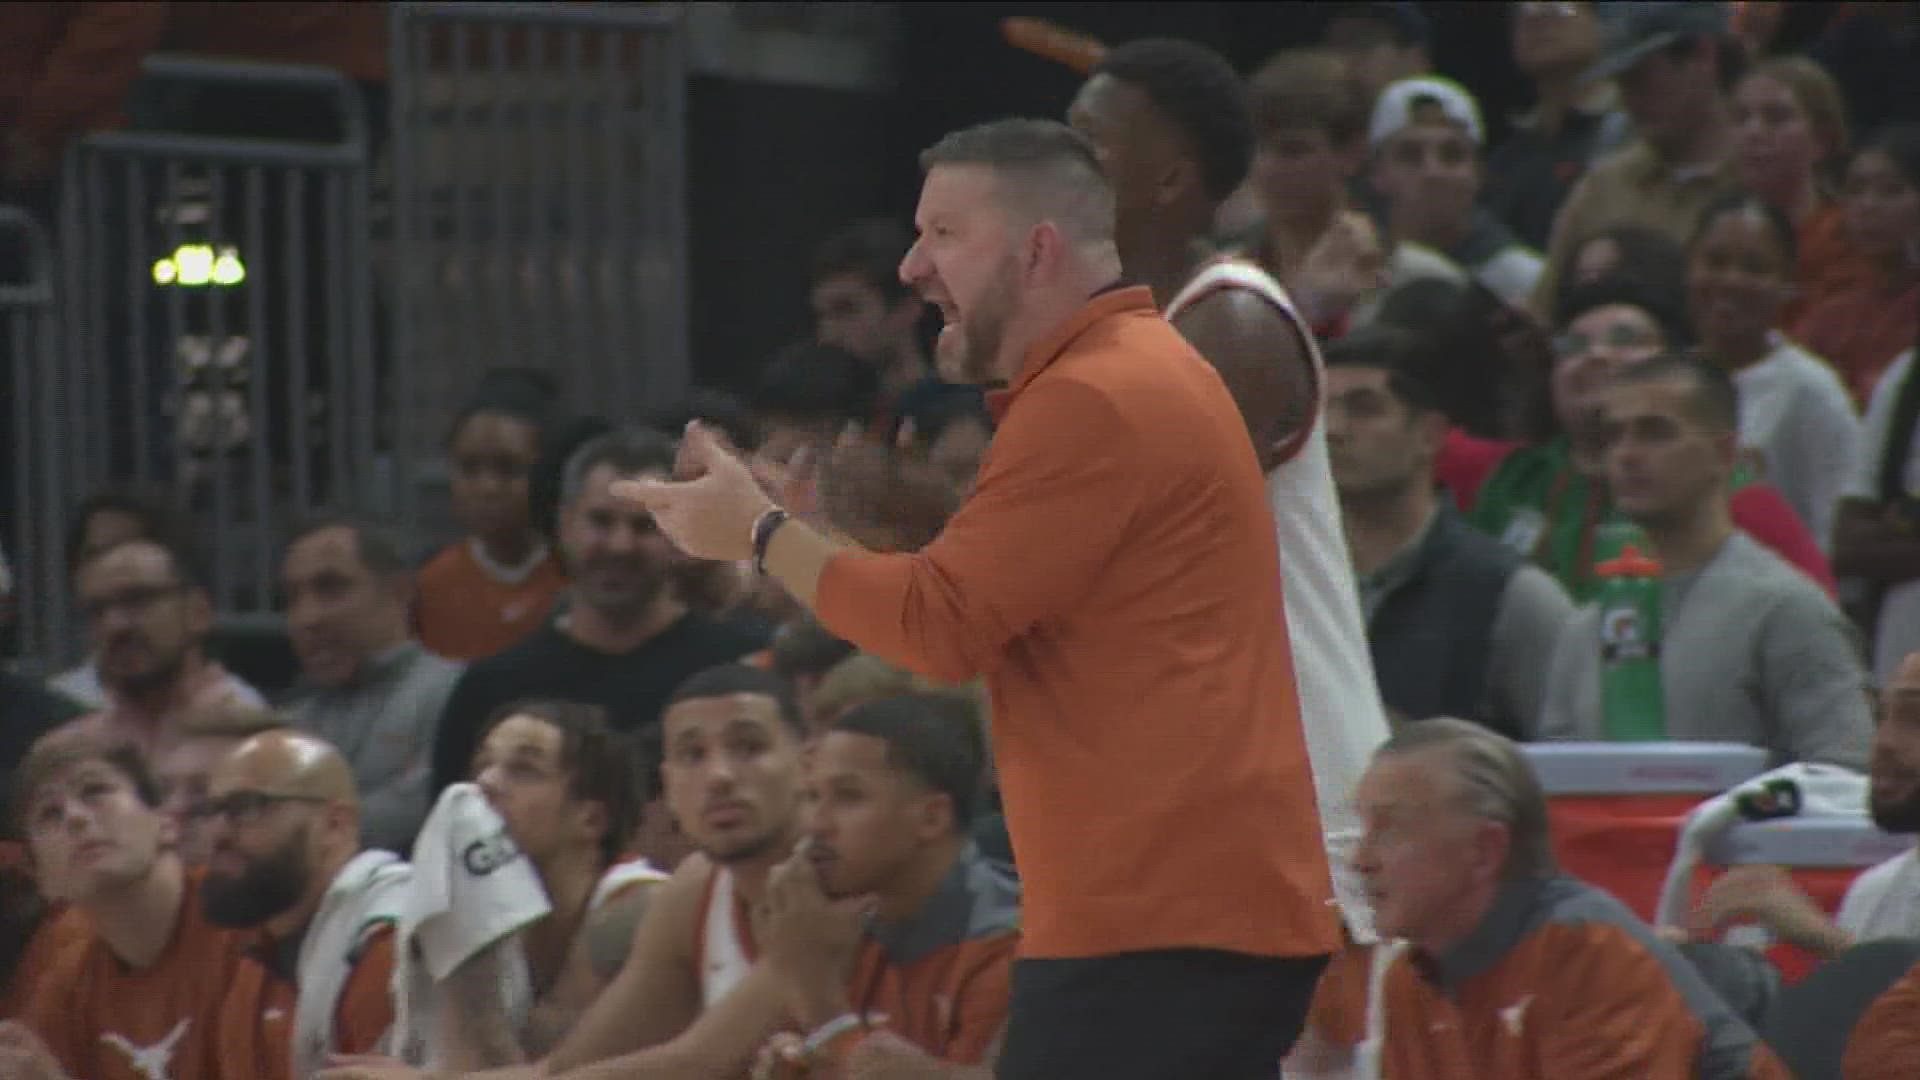 UT basketball coach Chris Beard fired less than two years after hire to  lead team to prominence 